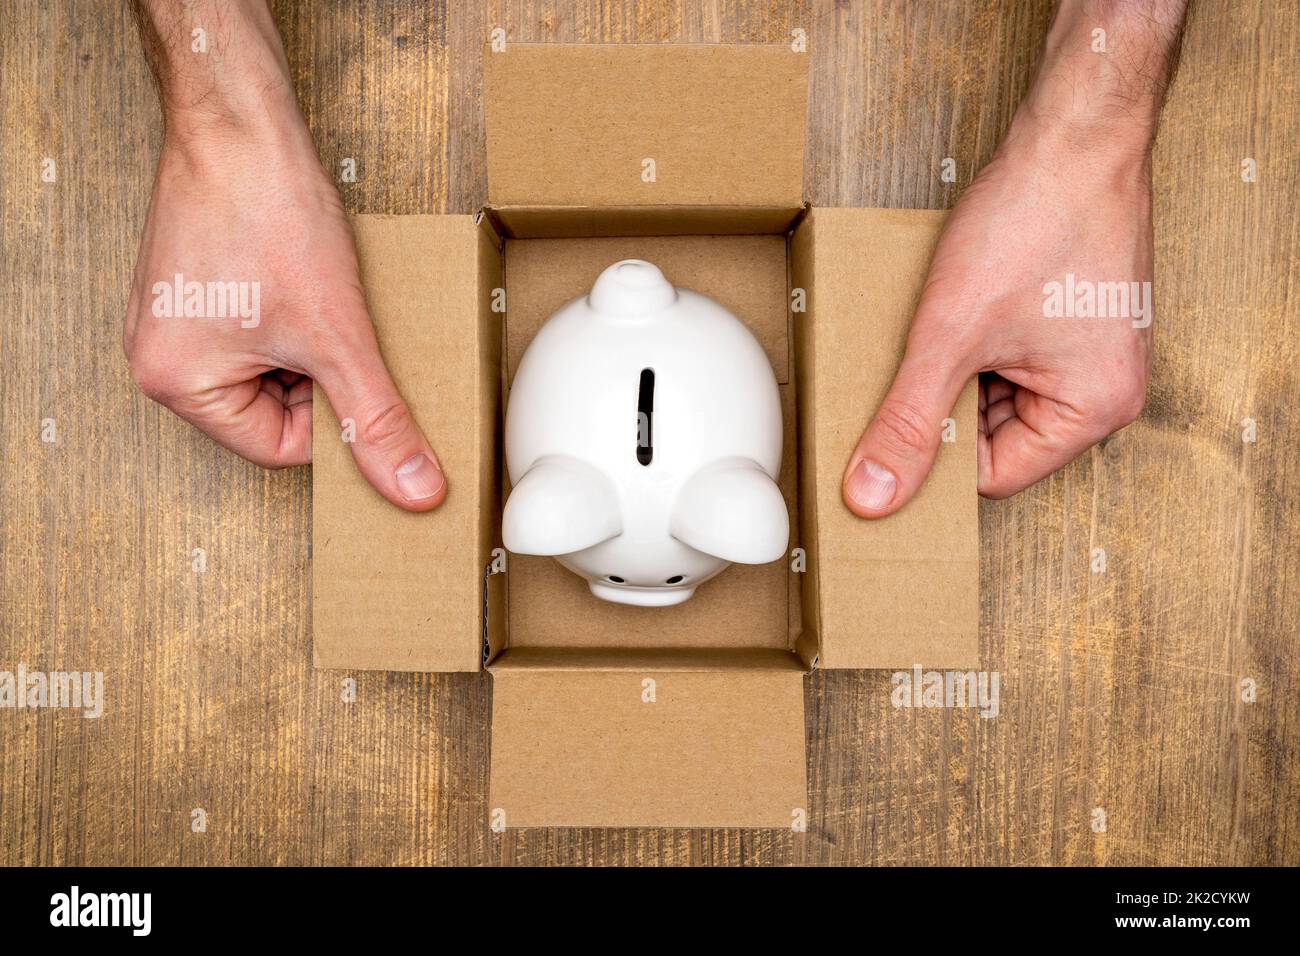 Piggy bank in open box made from corrugated cardboard Stock Photo